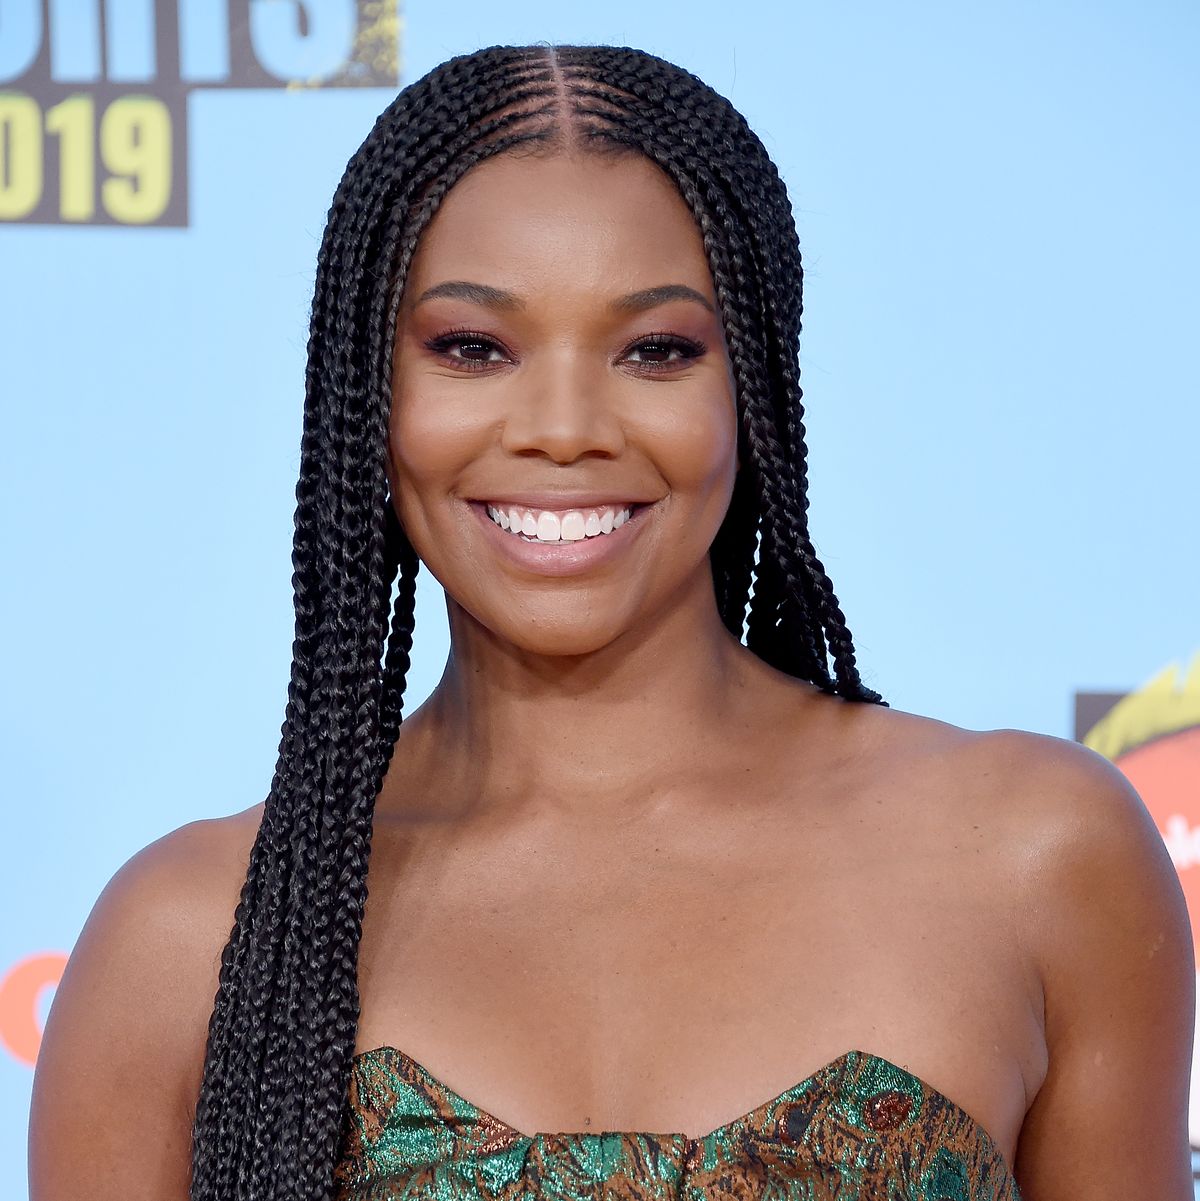 Gabrielle Union Shows Off Toned Abs In Bikini Photo On Instagram